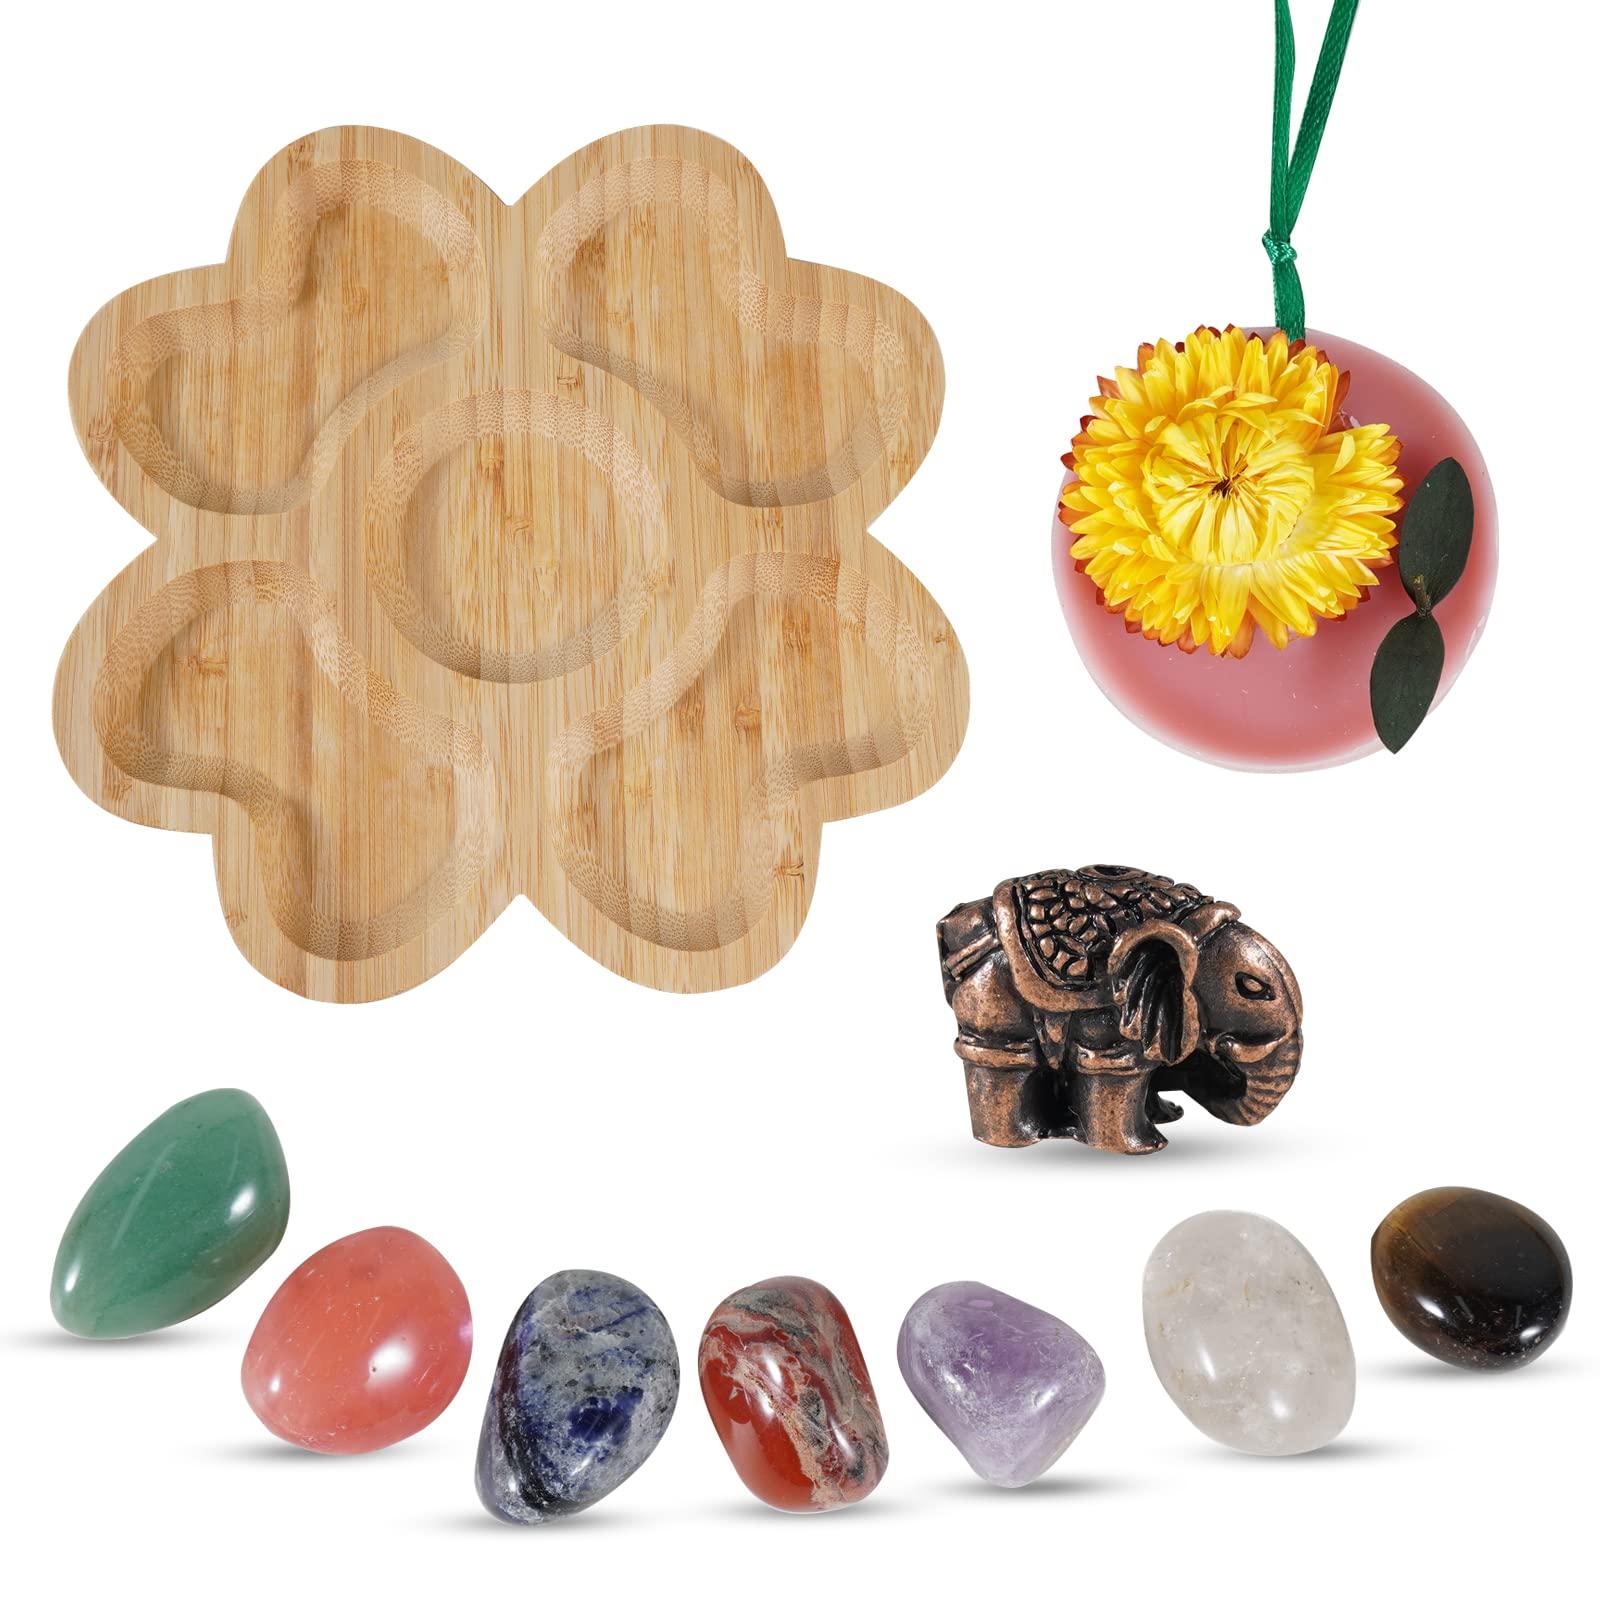 Soulnioi Wooden Decorative Tray For Crystal (Four- Leaf Clover Shaped), Hanging Scented Wax Sachet Amber Ebony, Elephant Incense Stick, 7pcs Chakra Crystal Polished Stones, Gift for Home Decor